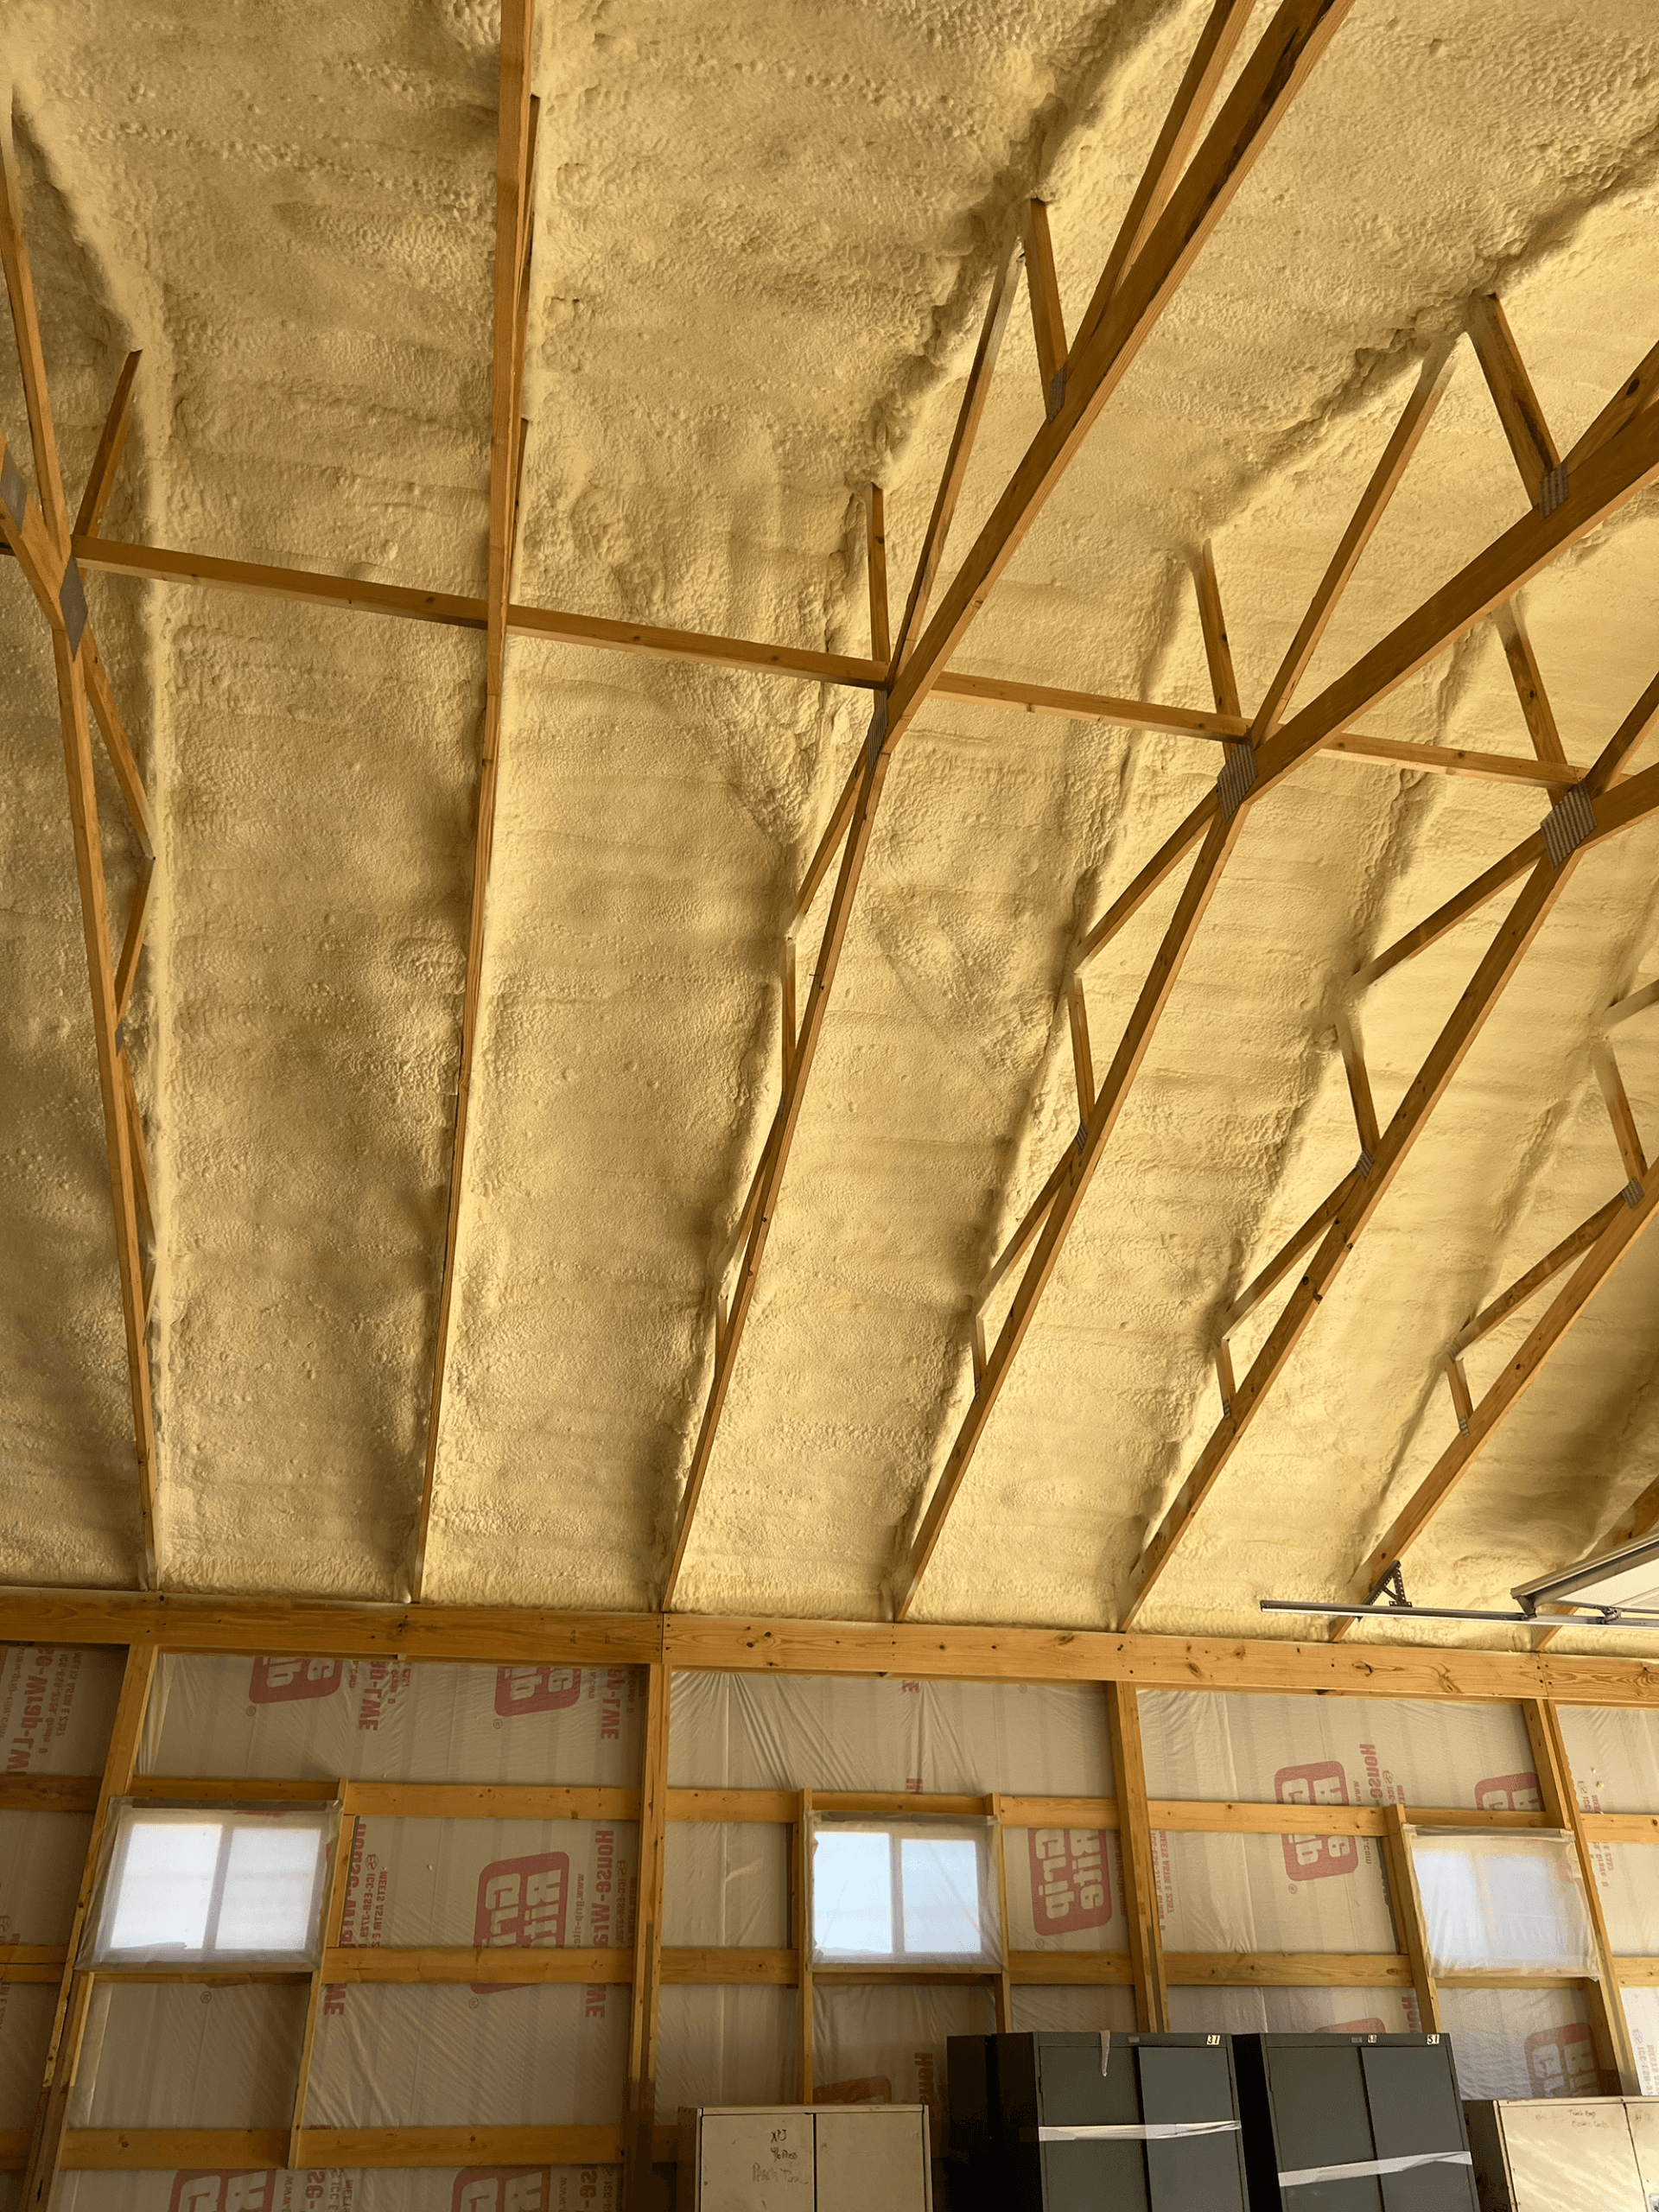 Raise the Roof for Quality Ceiling Insulation in Mid-Missouri From DK Spray Foam & Insulation!